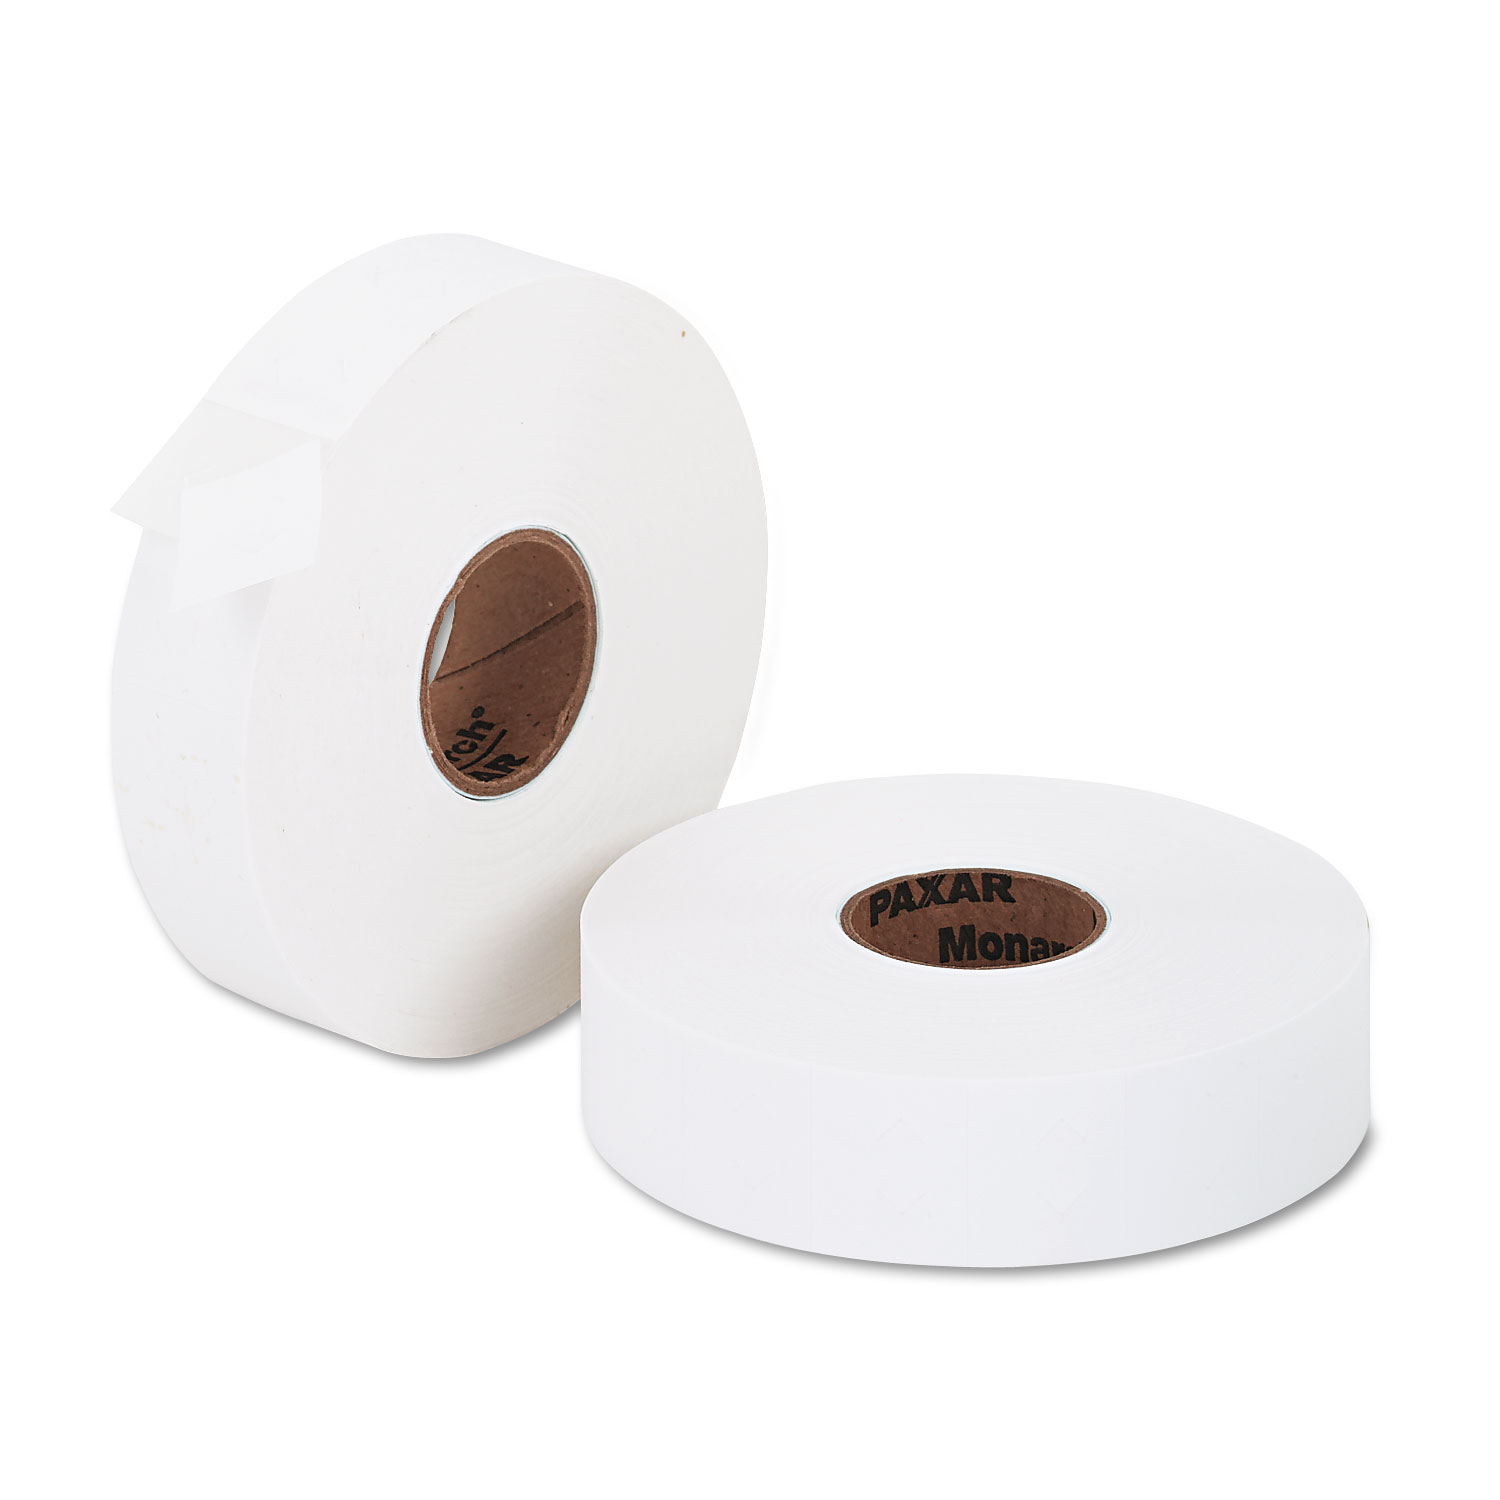  Monarch 925084 Easy-Load Two-Line Labels for Pricemarker 1136, 0.63 x 0.88, White, 1,750/Roll, 2 Rolls/Pack (MNK925084) 